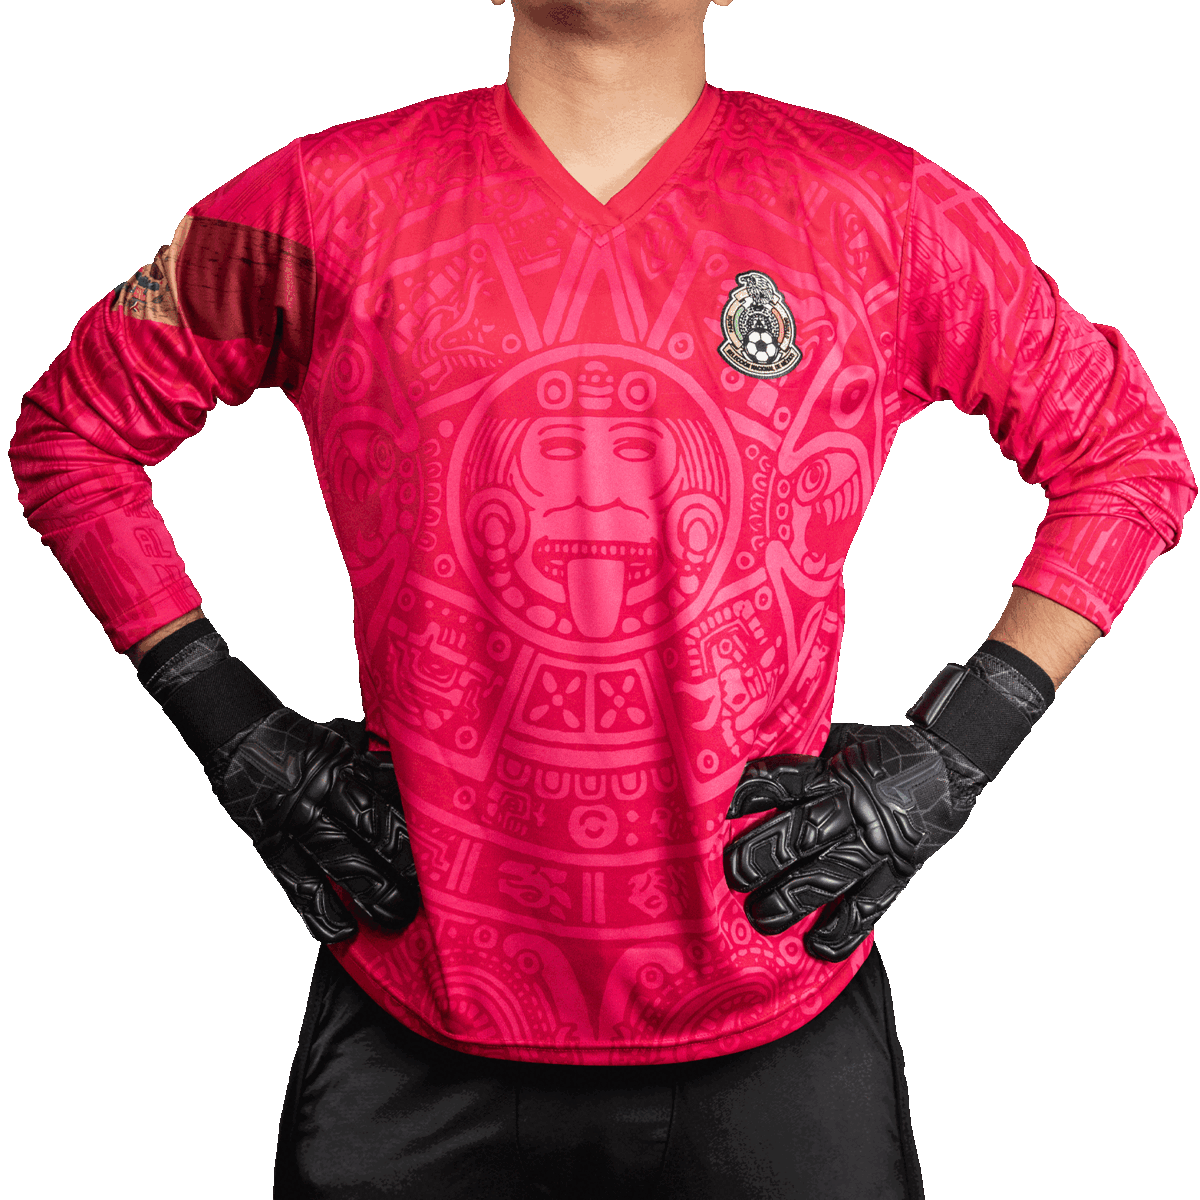 Mexico 98 Pink Retro Goalkeeper Jersey by Geko Sports Limited Edition